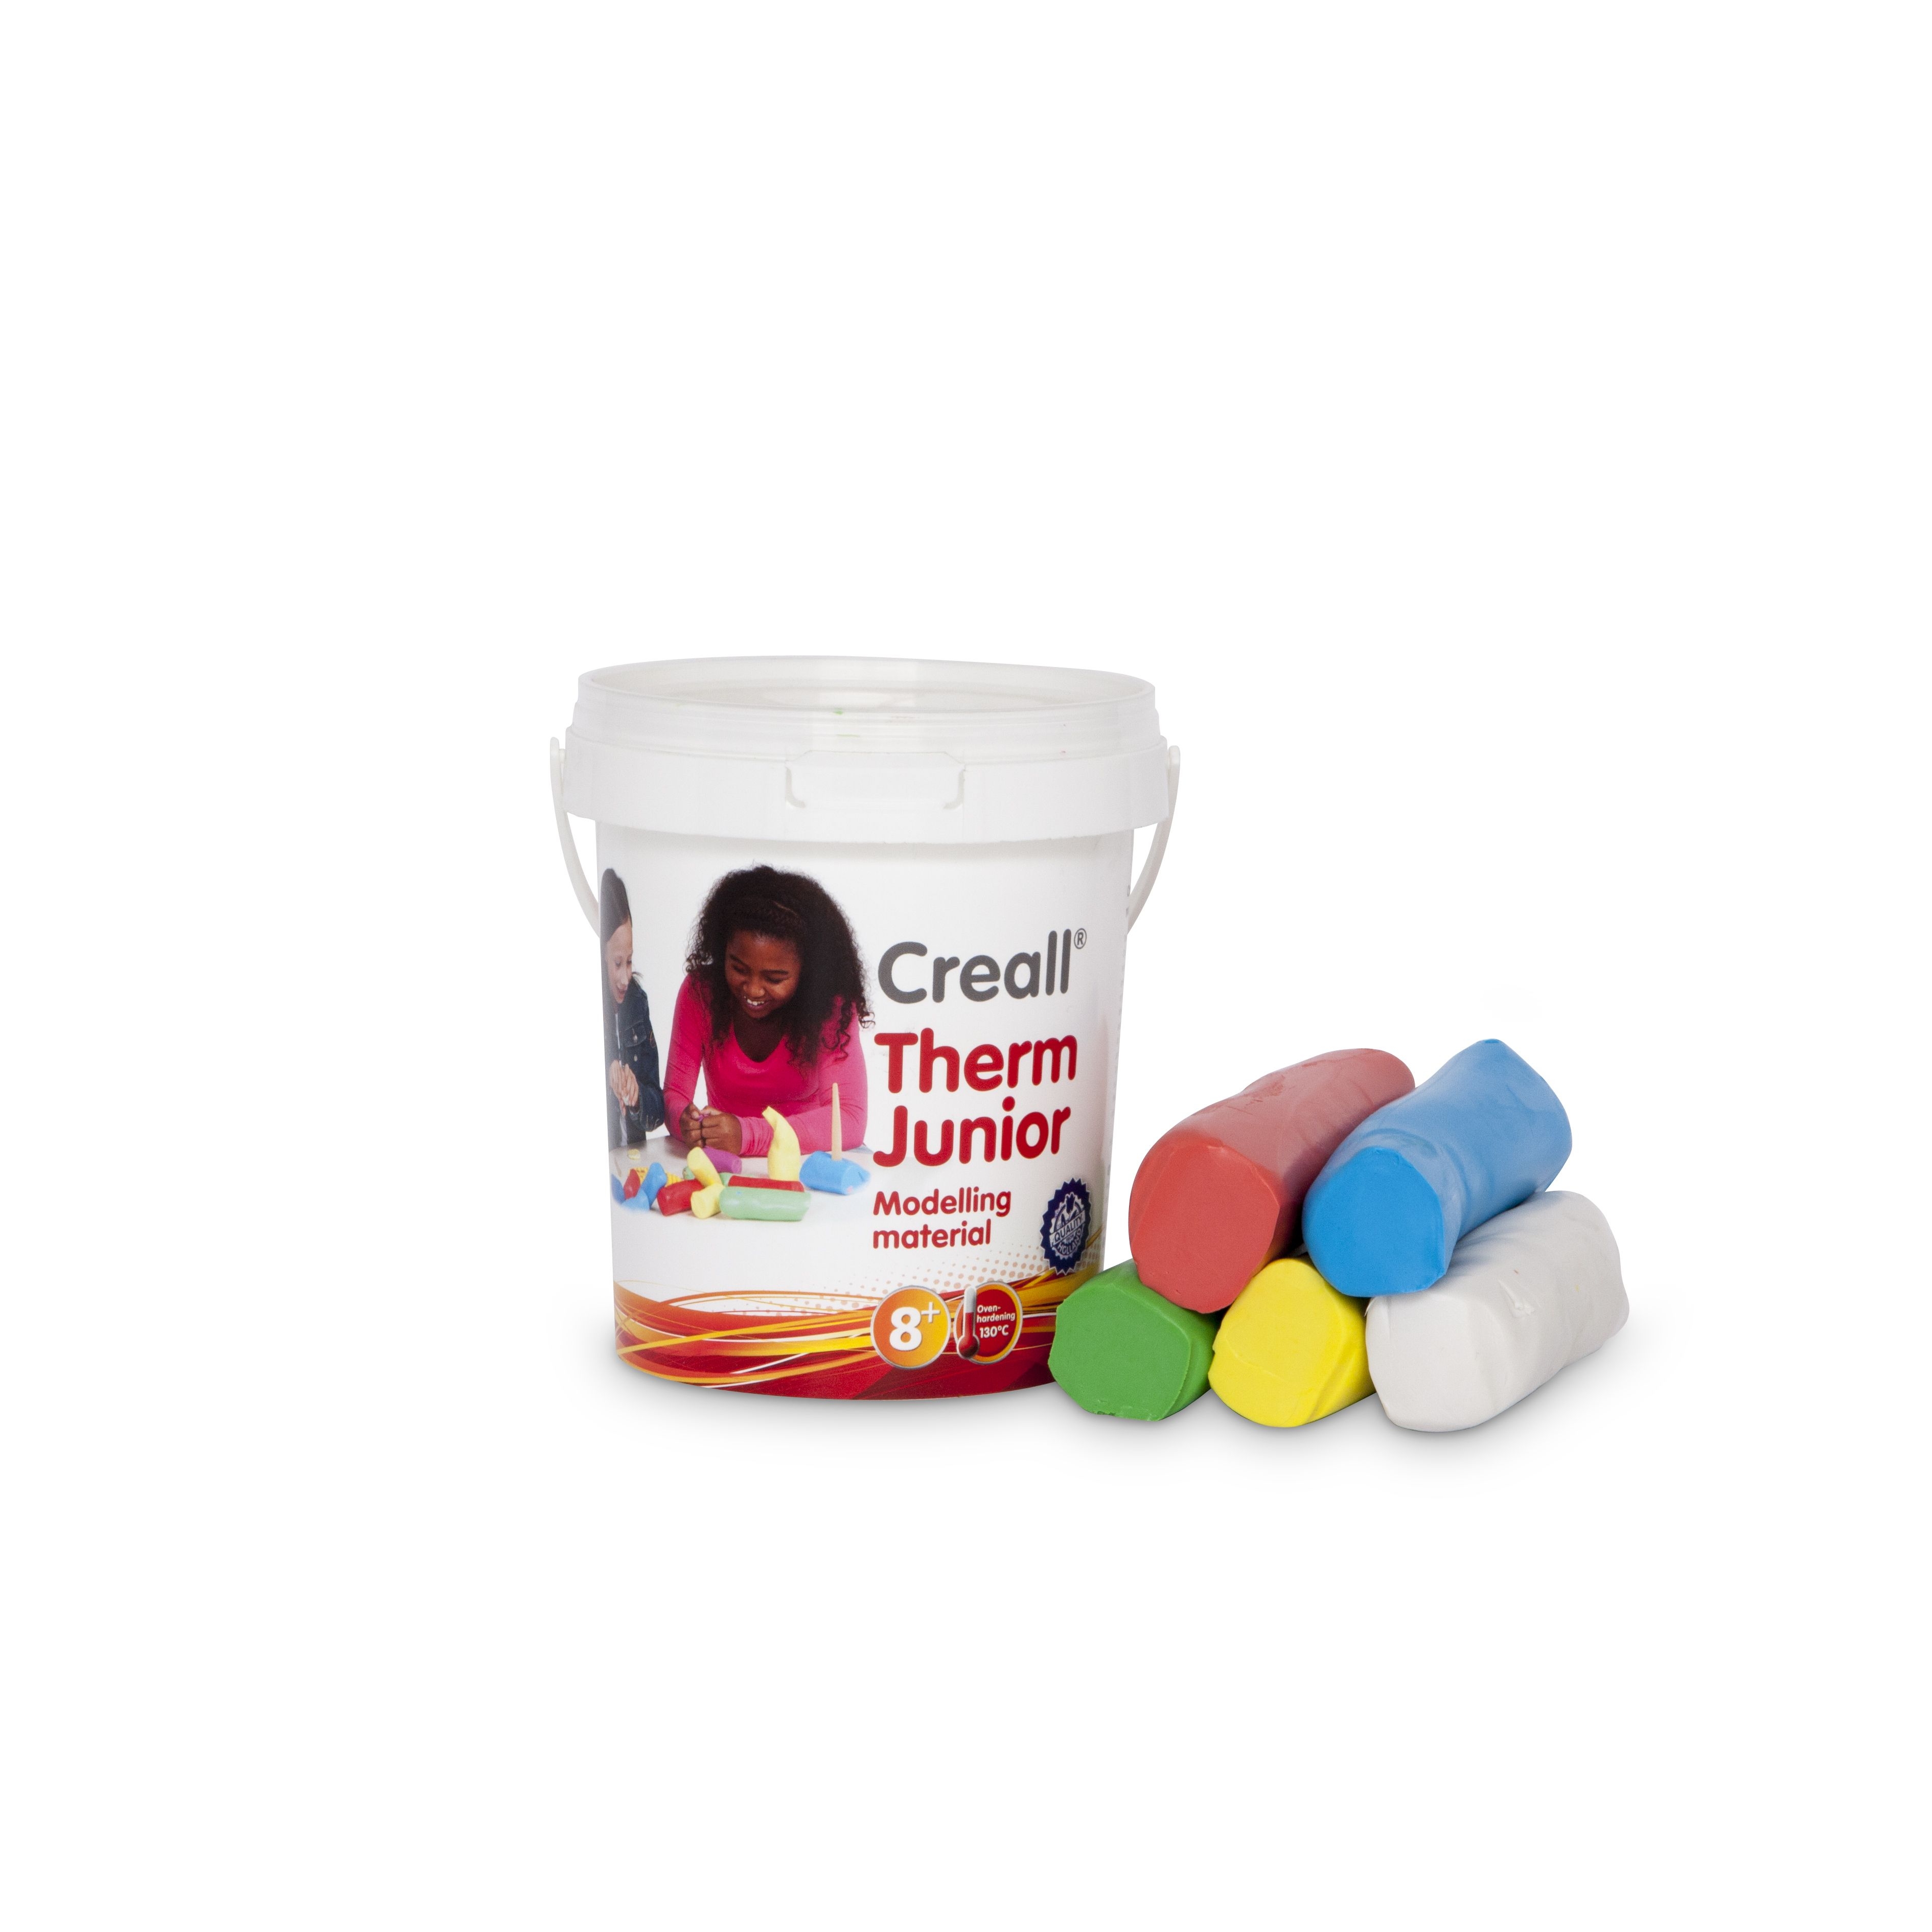 Creall Therm Junior